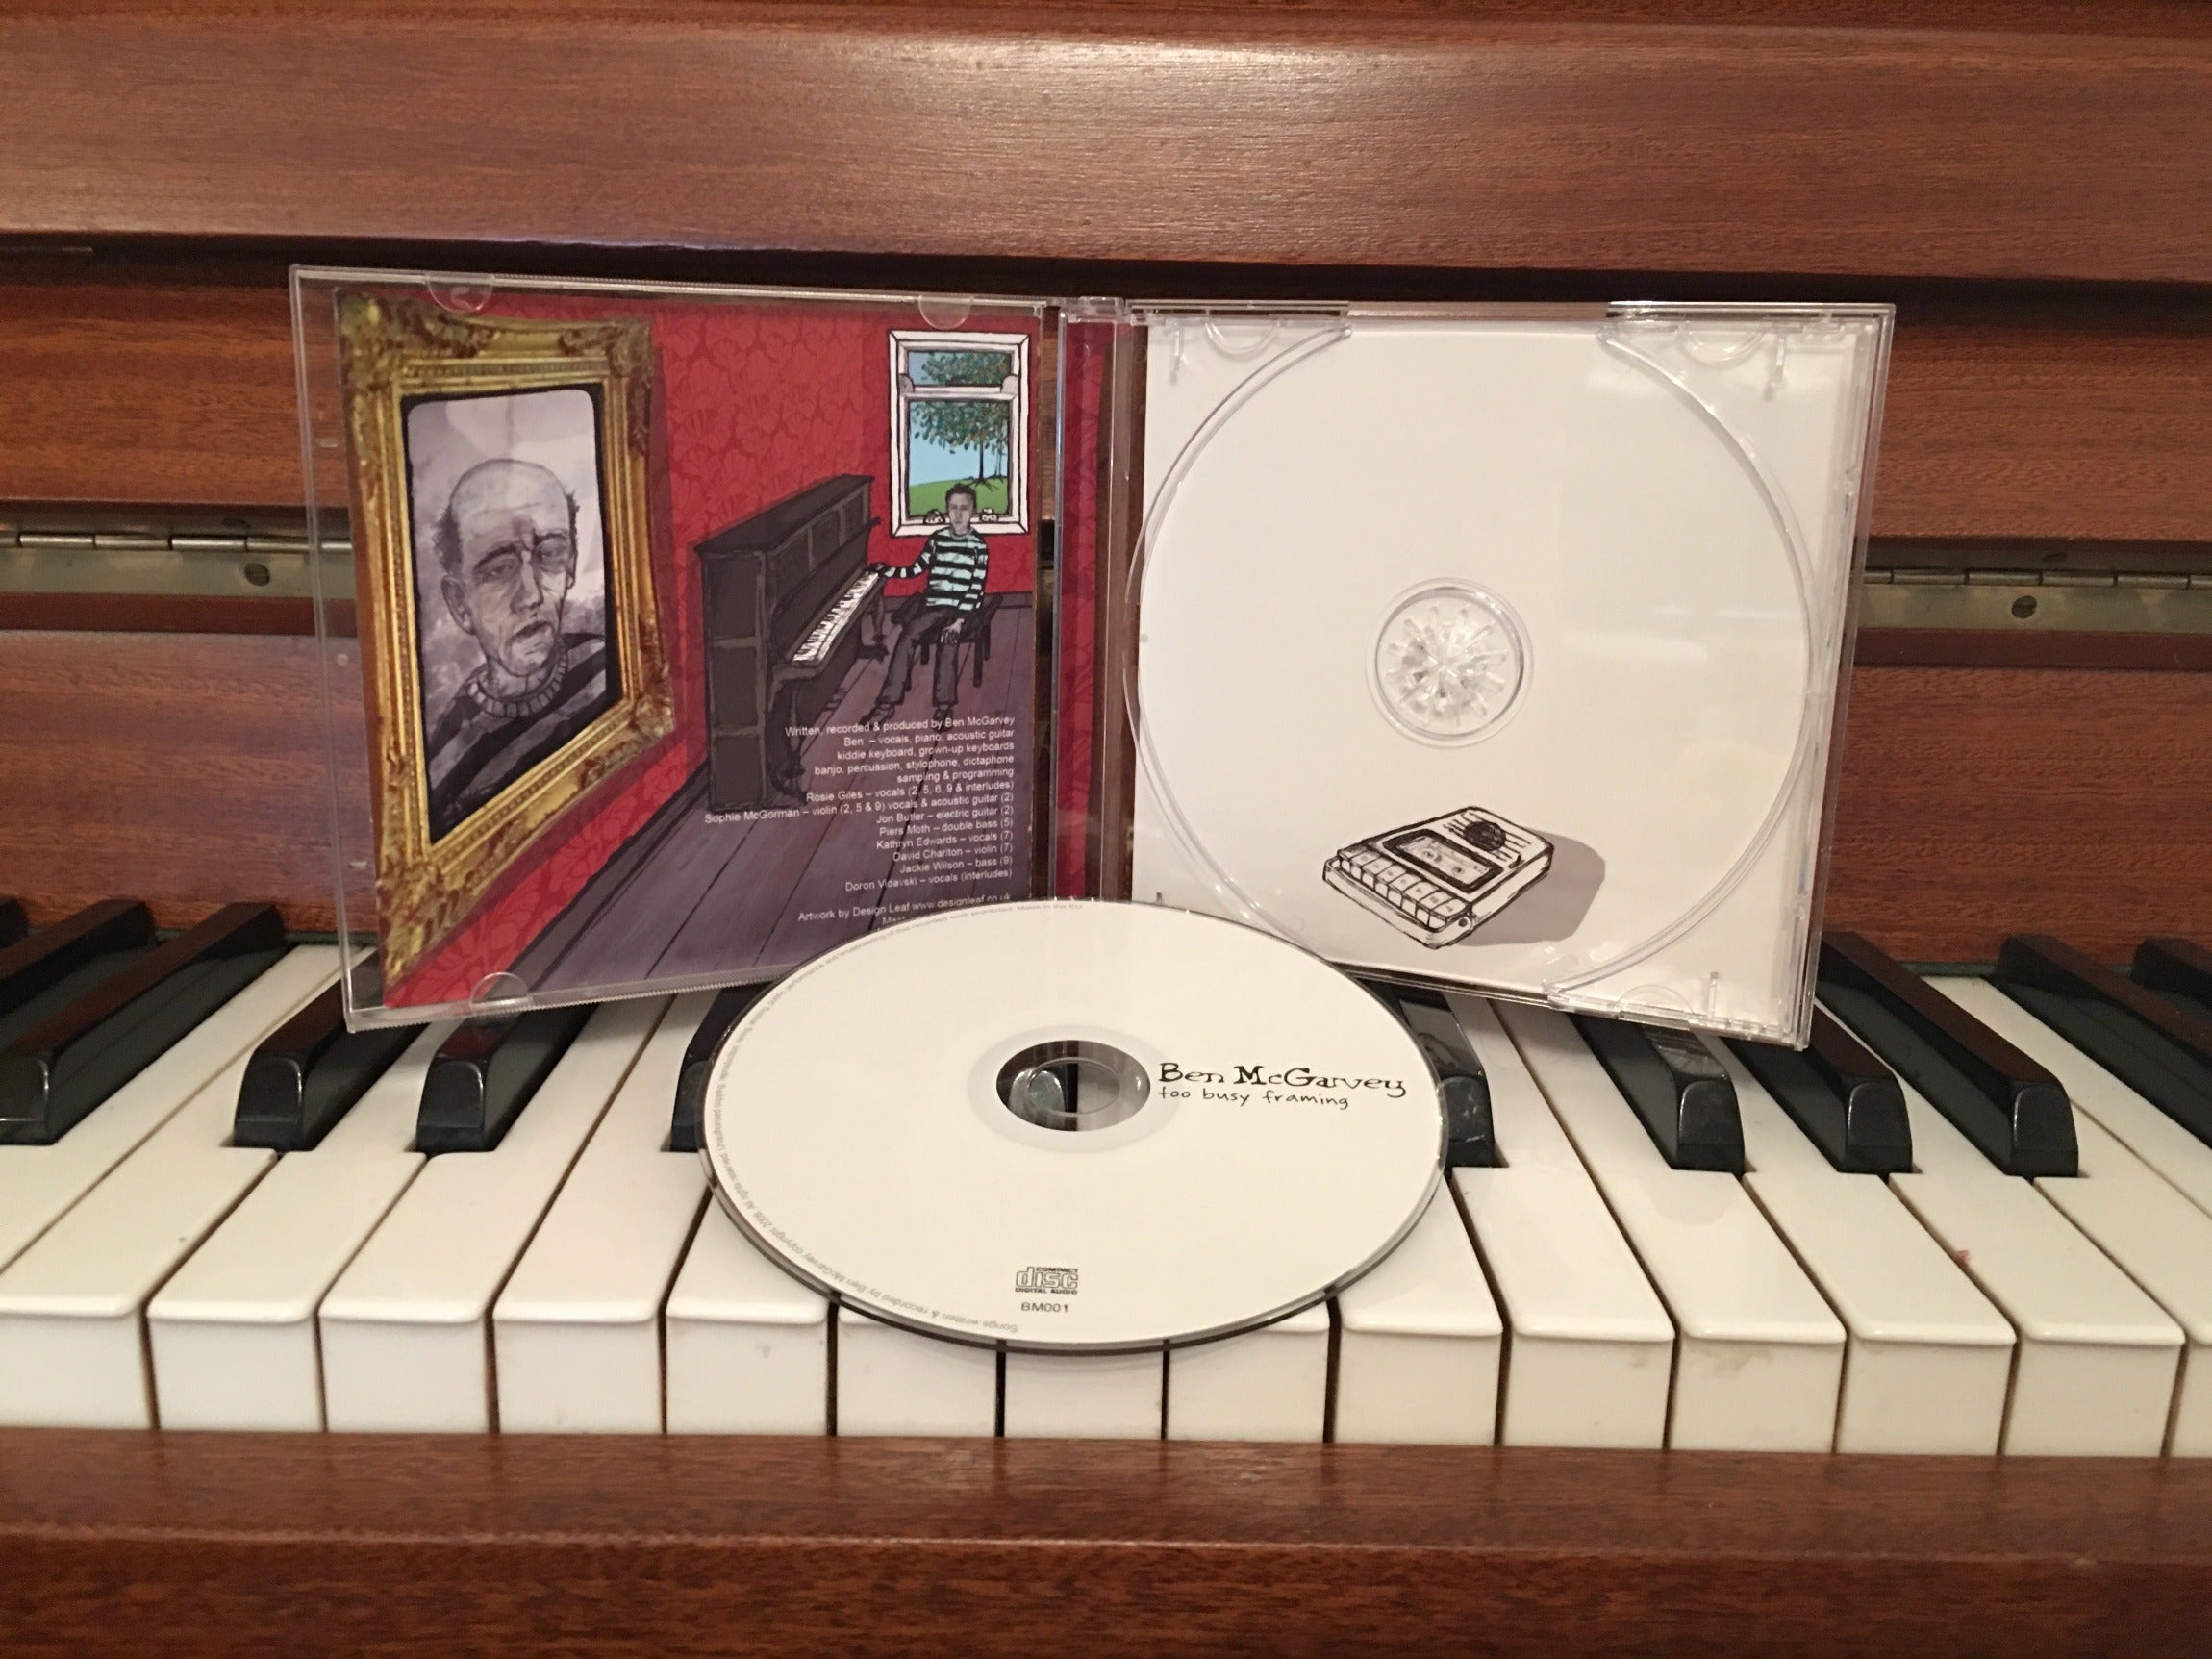 4 CD SET (Wolf Hours, Reconstruction, Last Things, Too Busy Framing)